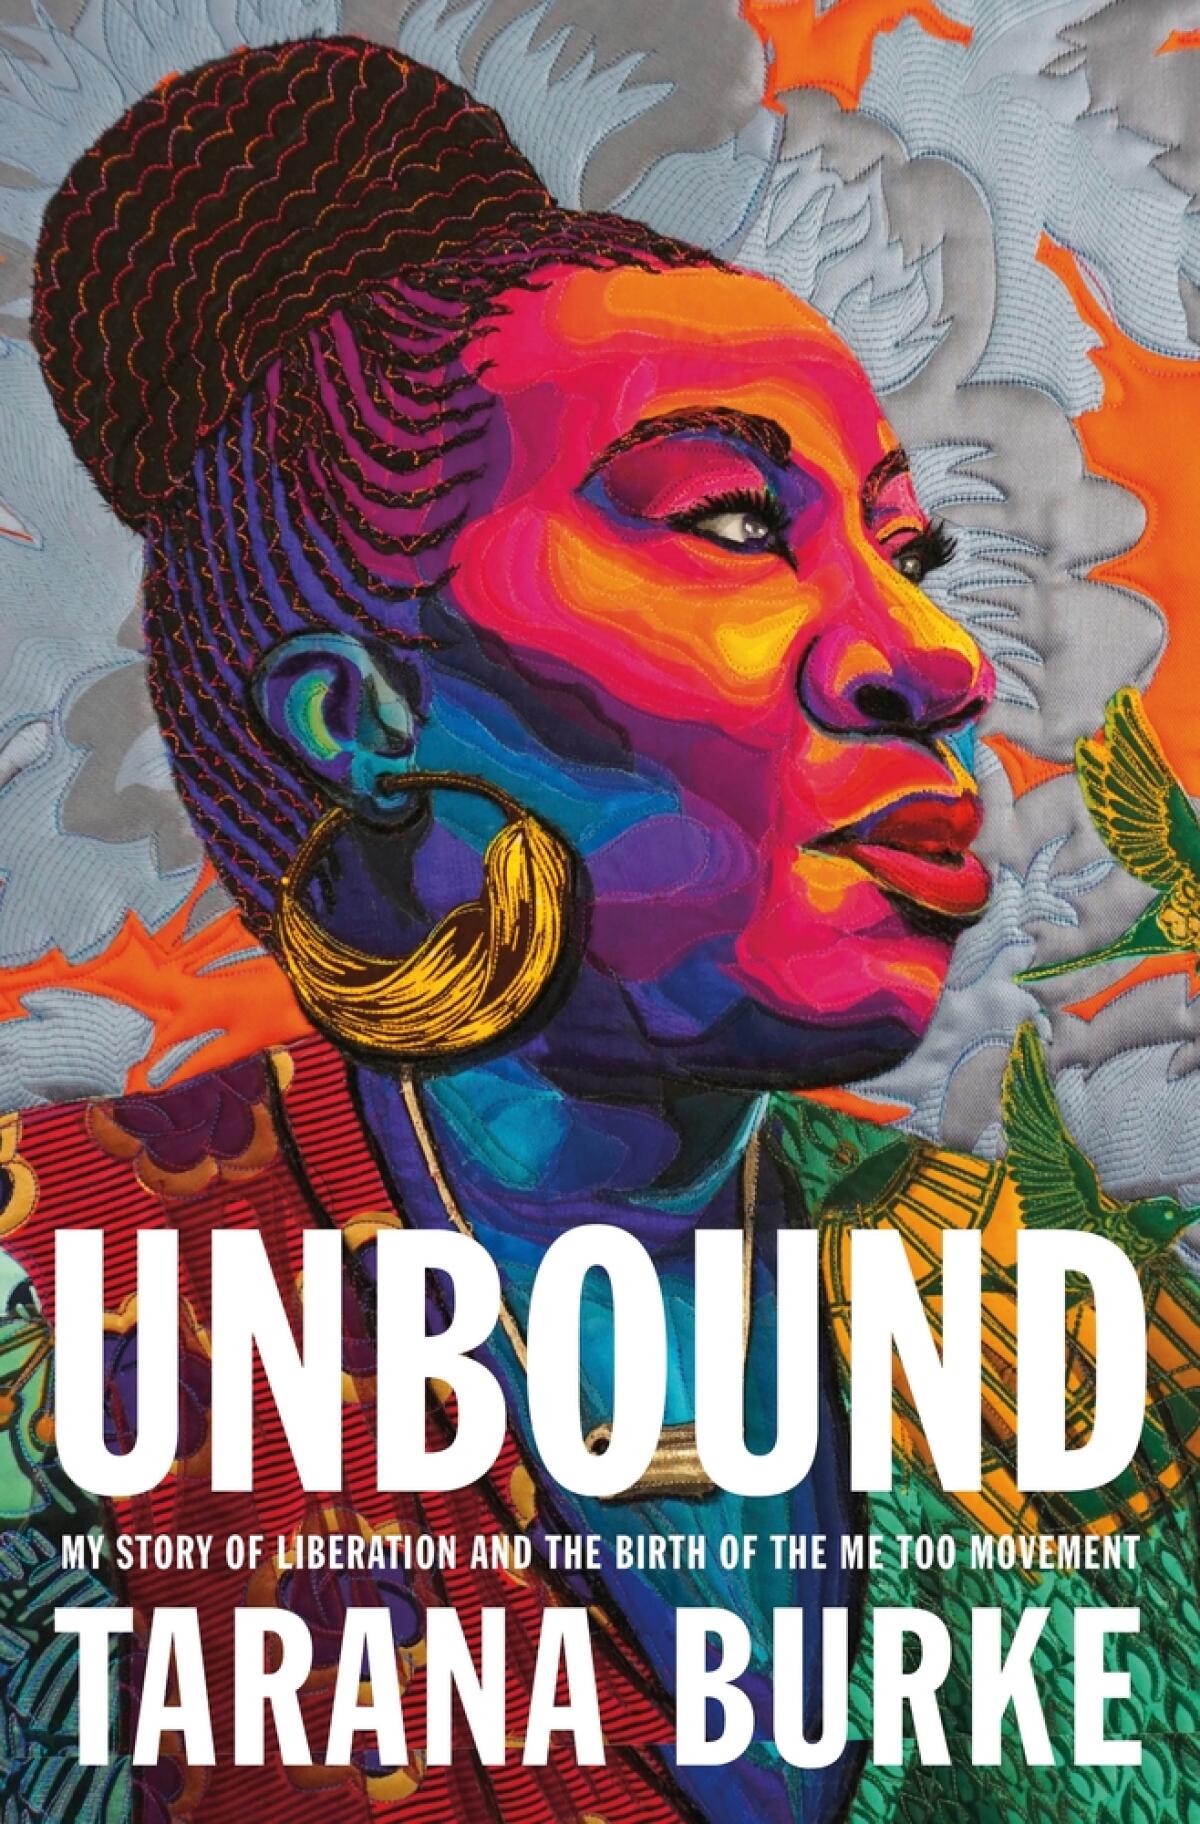 Book jacket for "Unbound: My Story of Liberation and the Birth of the Me Too Movement" by Tarana Burke